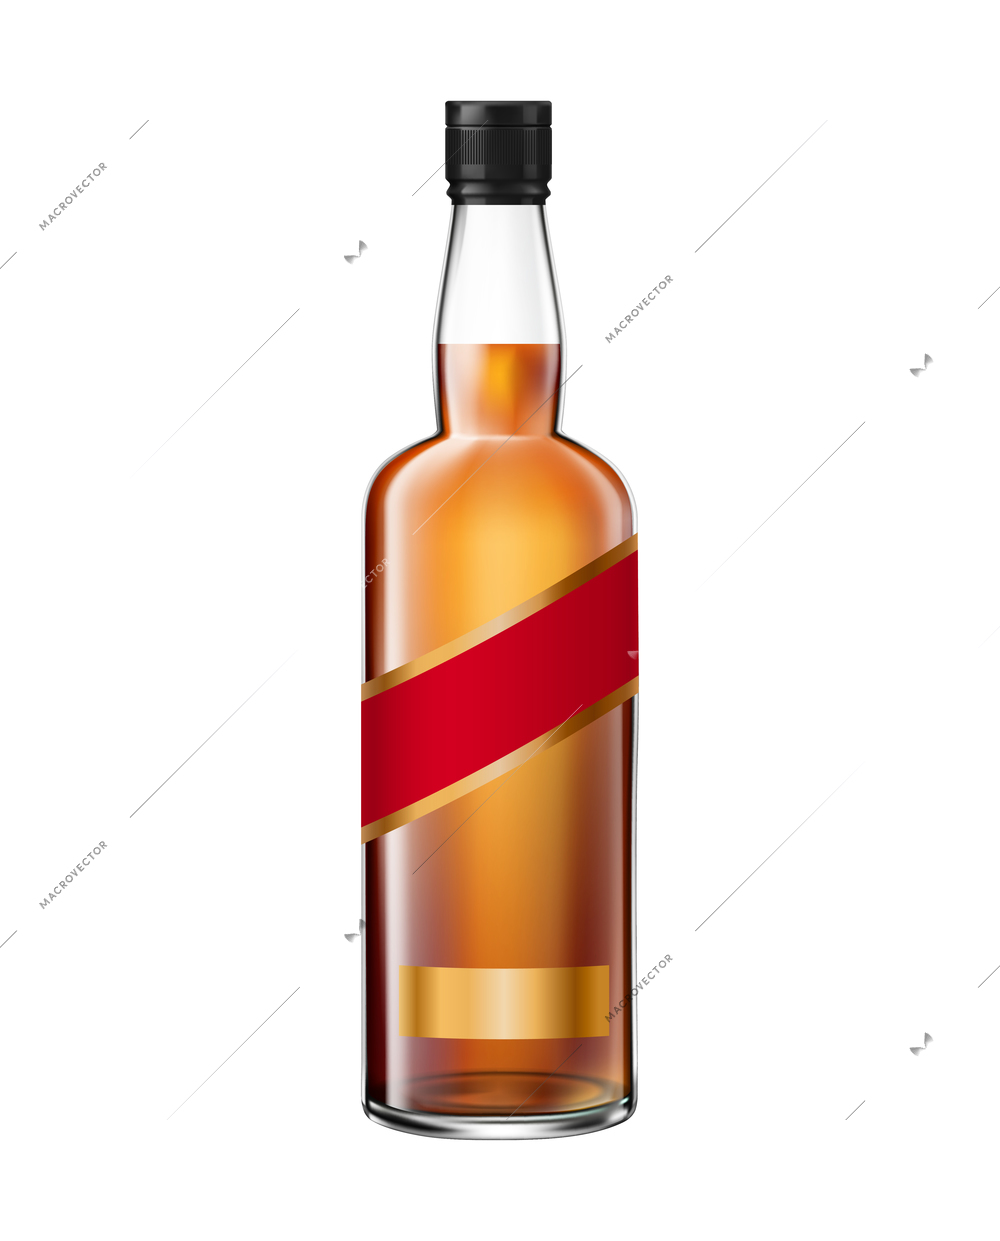 Full glass bottle of whisky with label realistic vector illustration